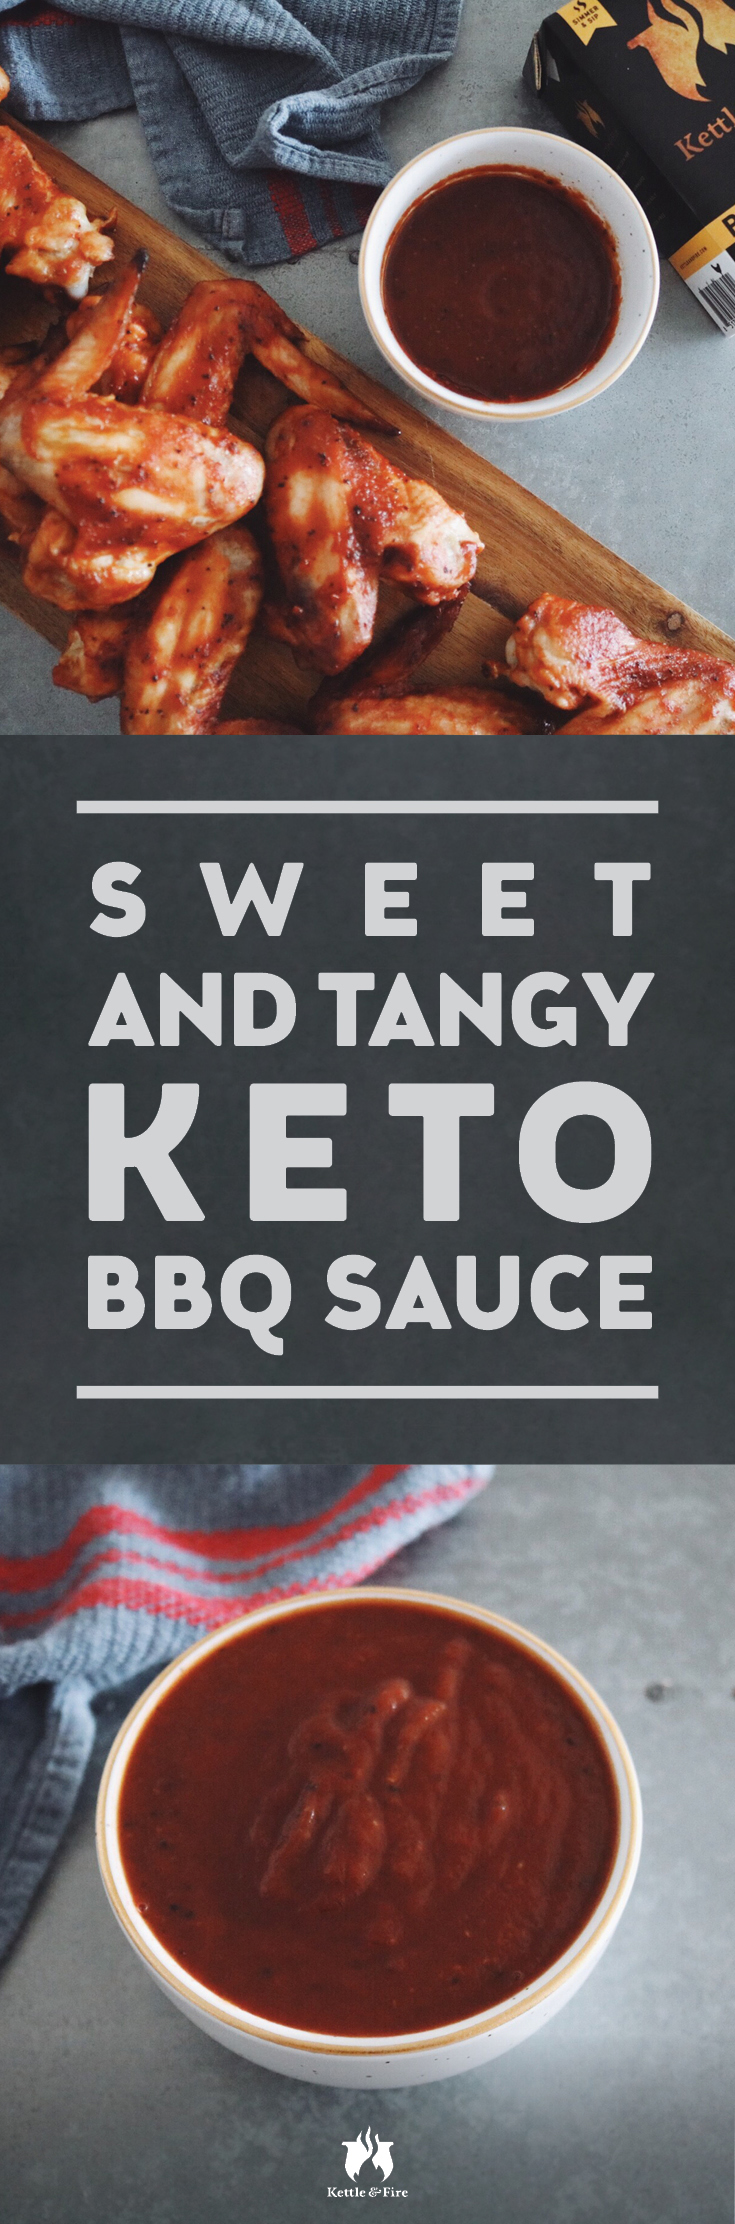 Sweet, tangy, and velvety smooth, this keto BBQ sauce is about to become your go-to condiment for anything in need of a flavor boost.